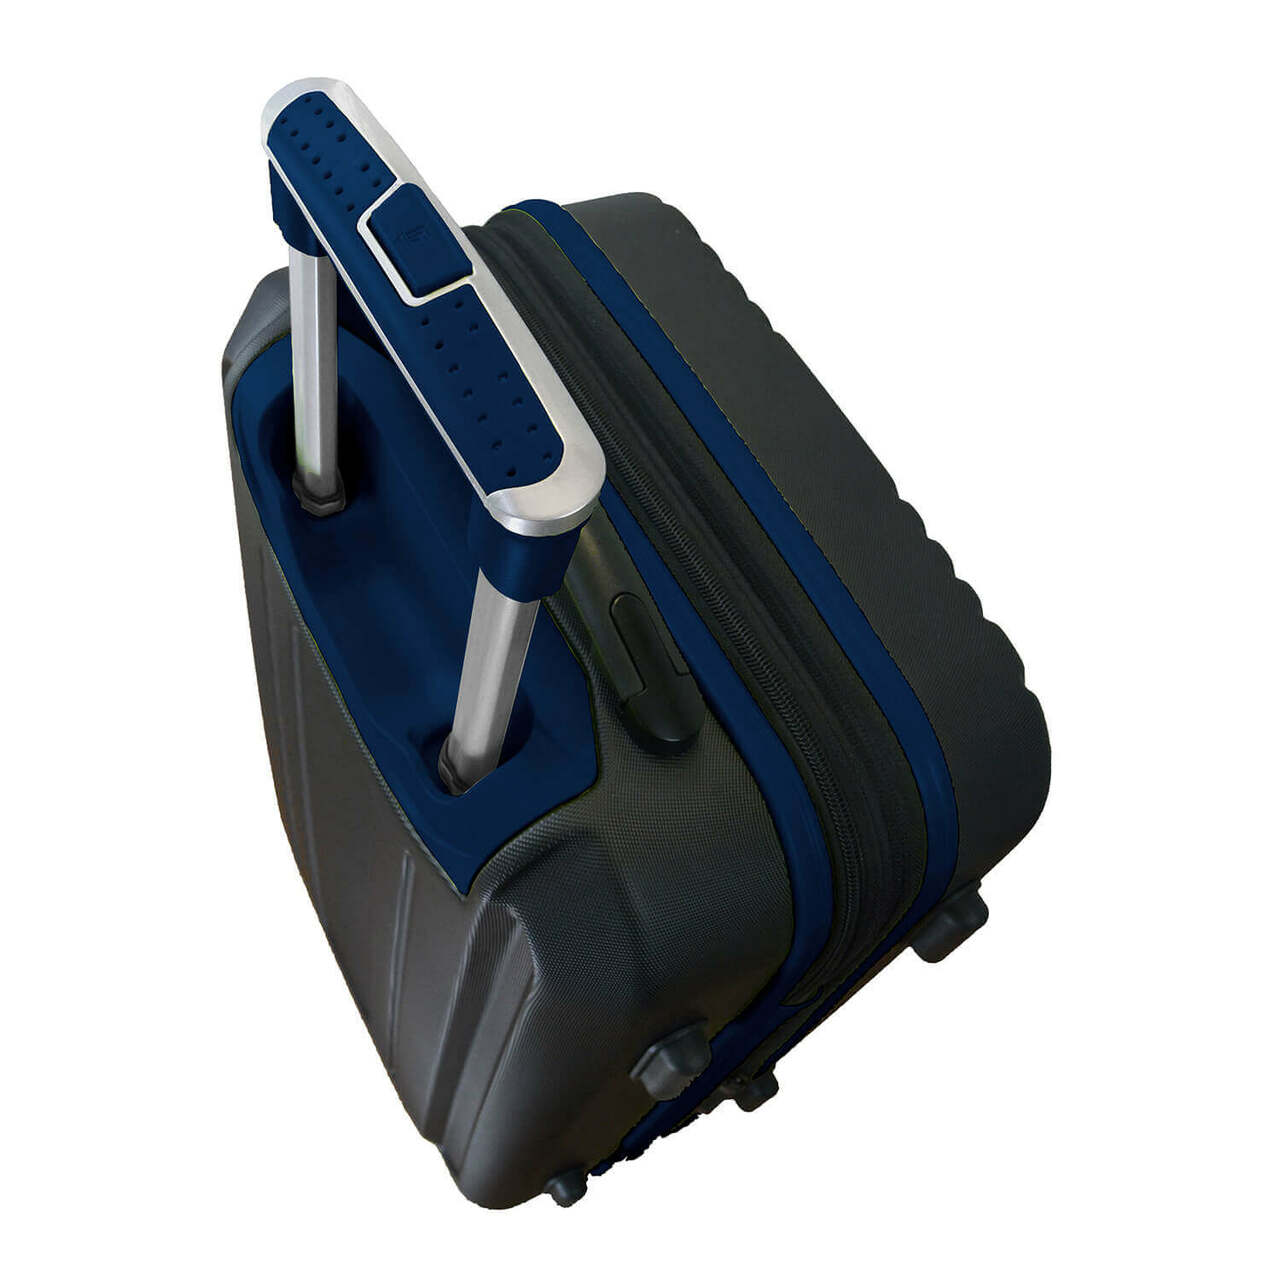 Rams Carry On Spinner Luggage | Los Angeles Rams Hardcase Two-Tone Luggage Carry-on Spinner in Navy